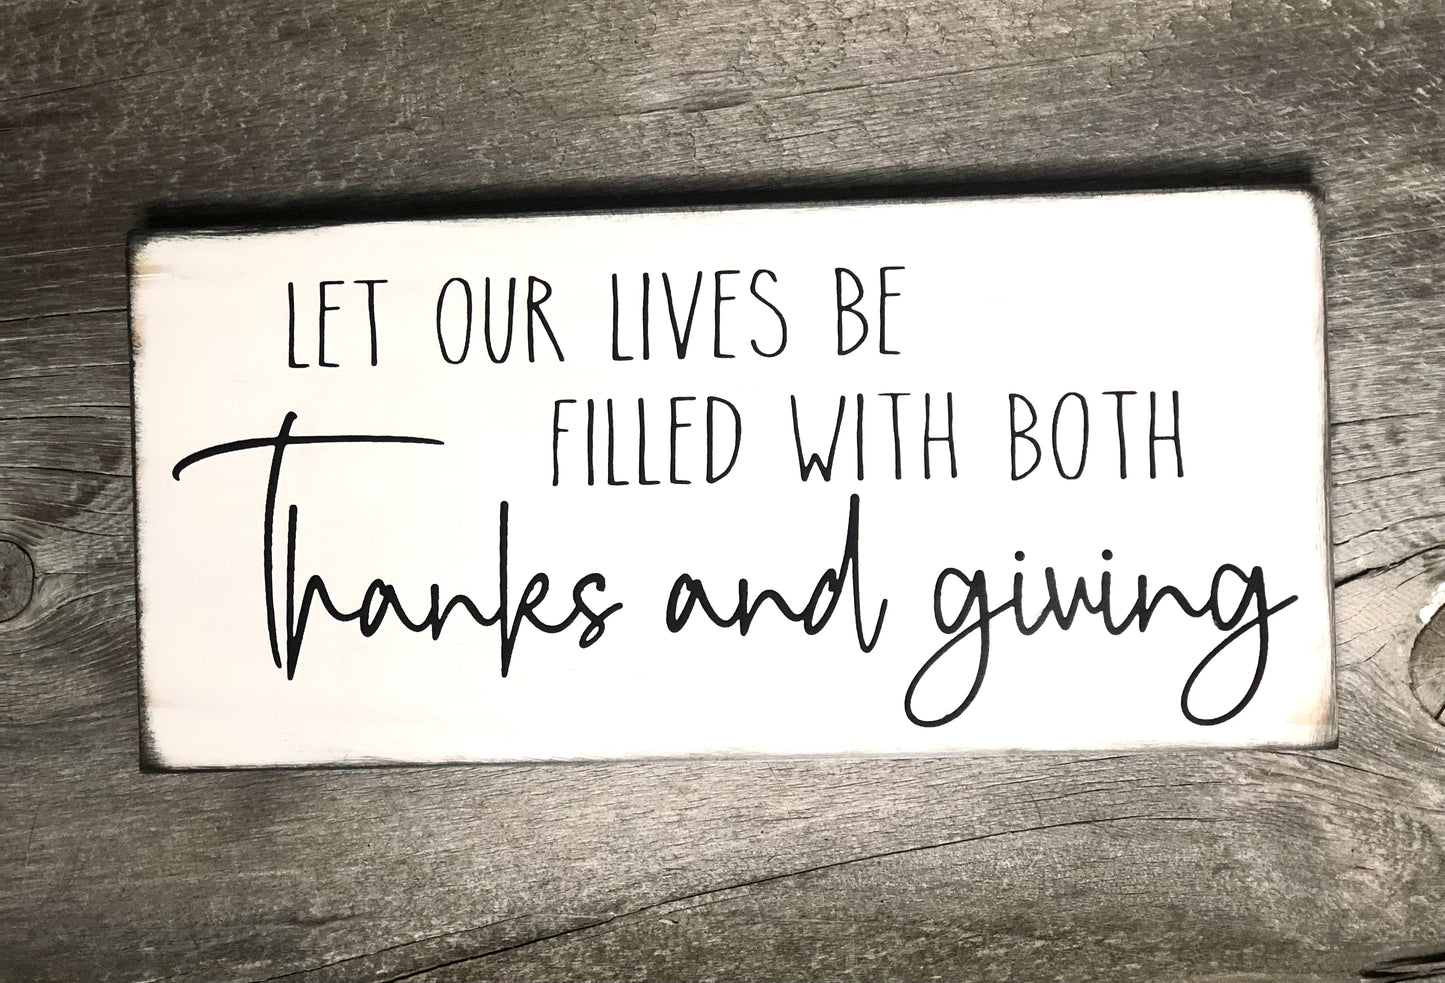 LET OUR LIVES BE FILLED WITH BOTH THANKS AND GIVING - WOOD SIGN